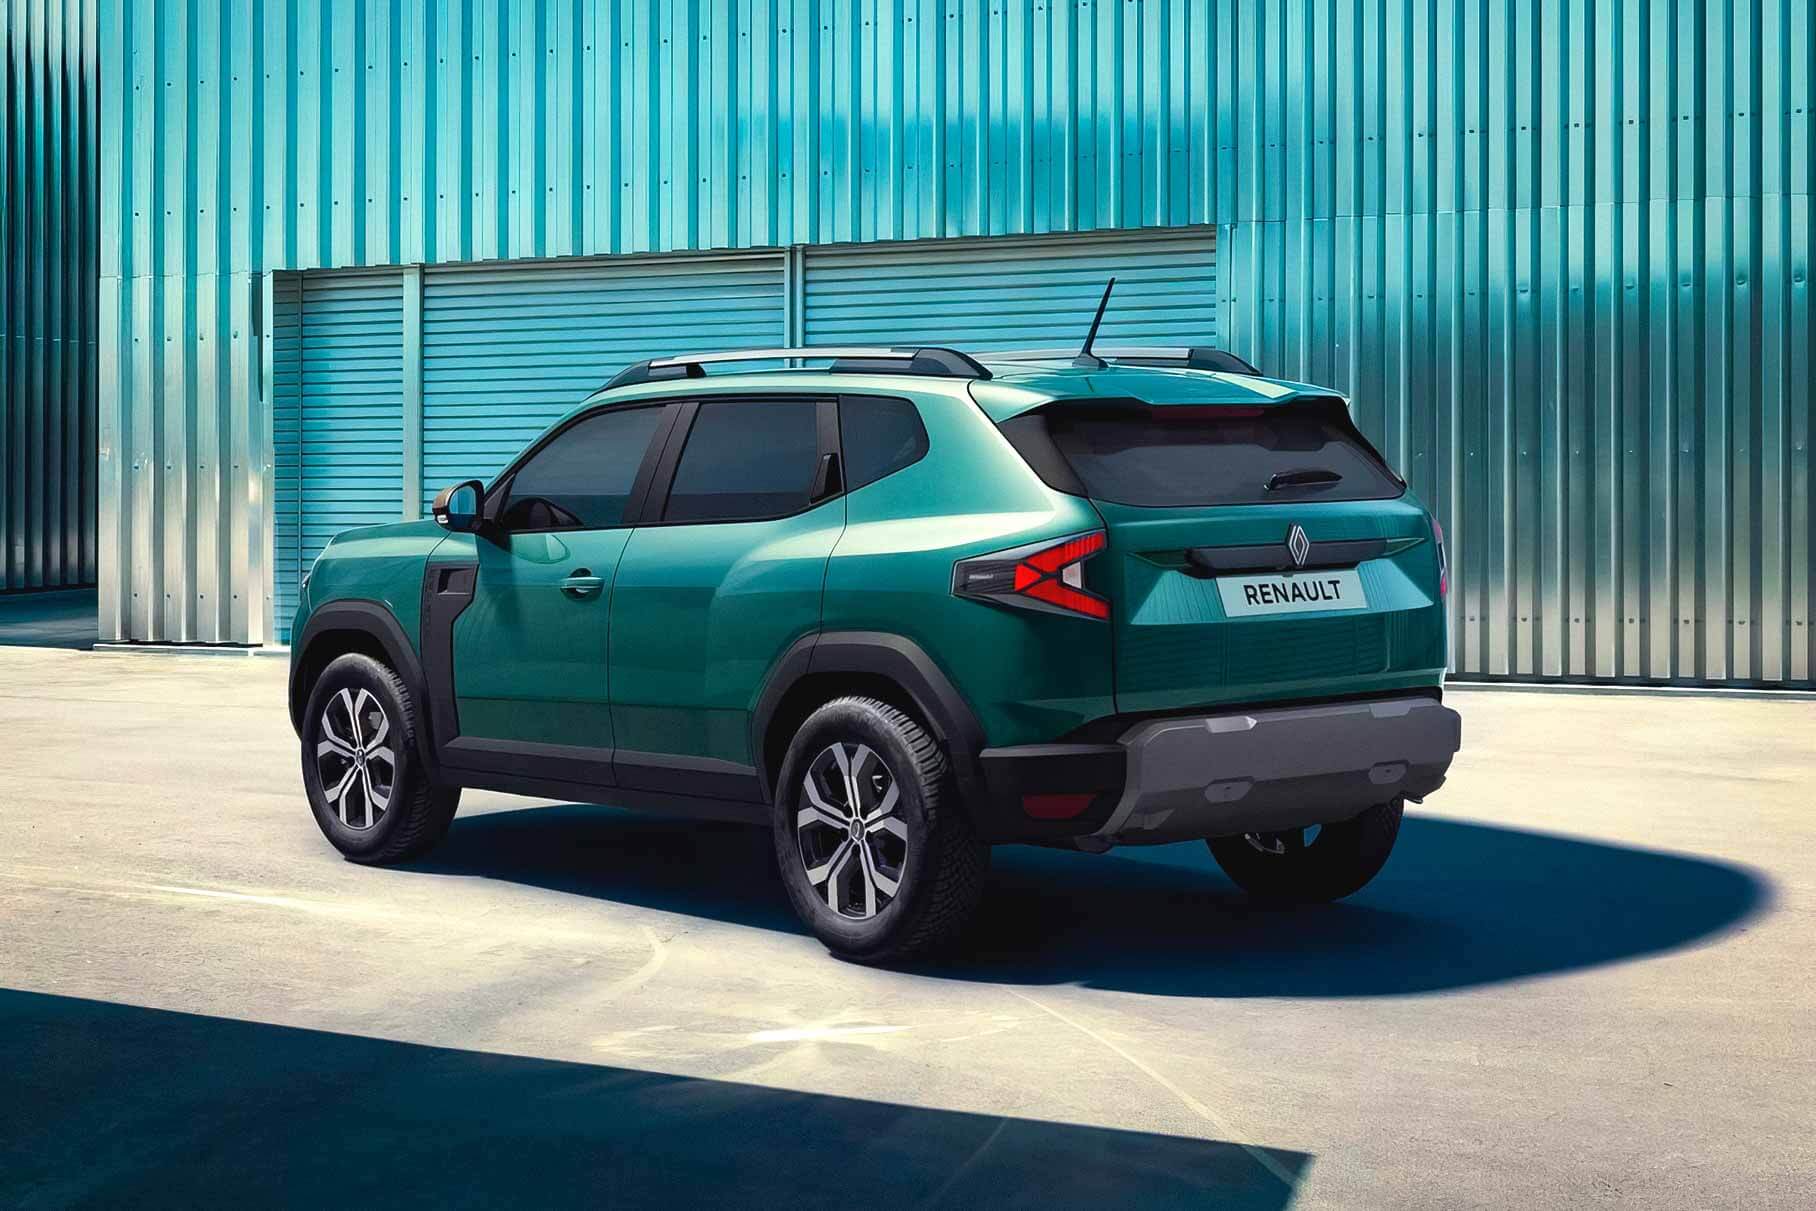 The once popular Renault Duster in Russia is preparing for a generation change